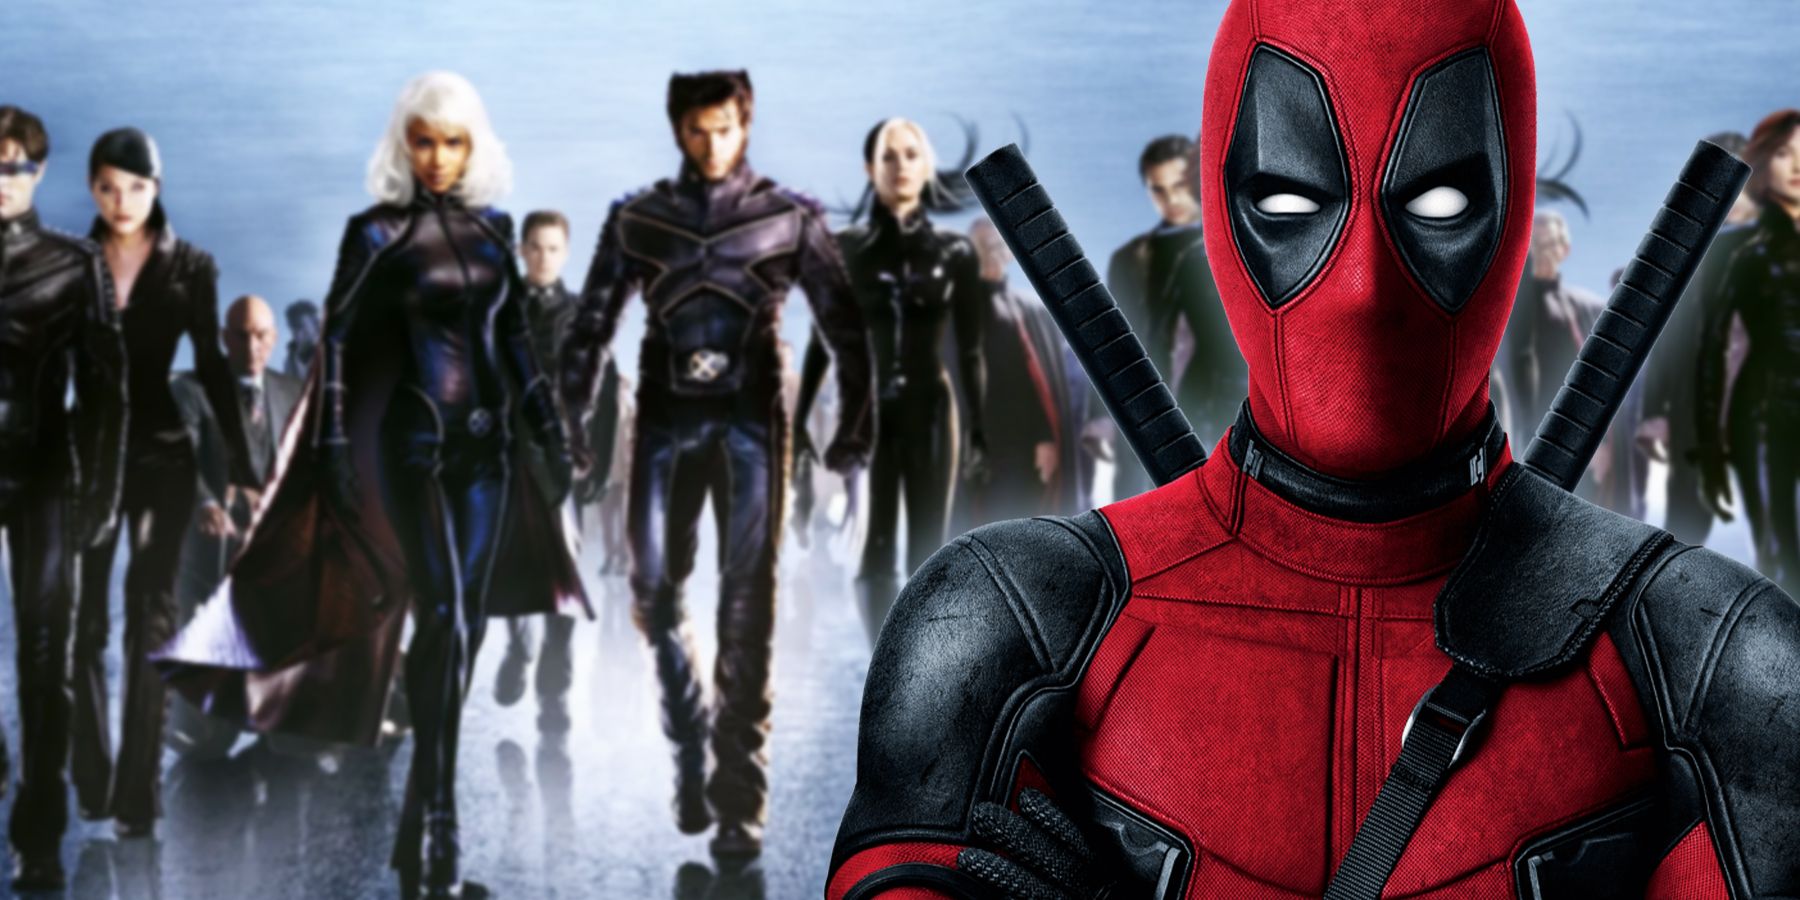 Deadpool in front of the blurry cast of X2: X-Men United